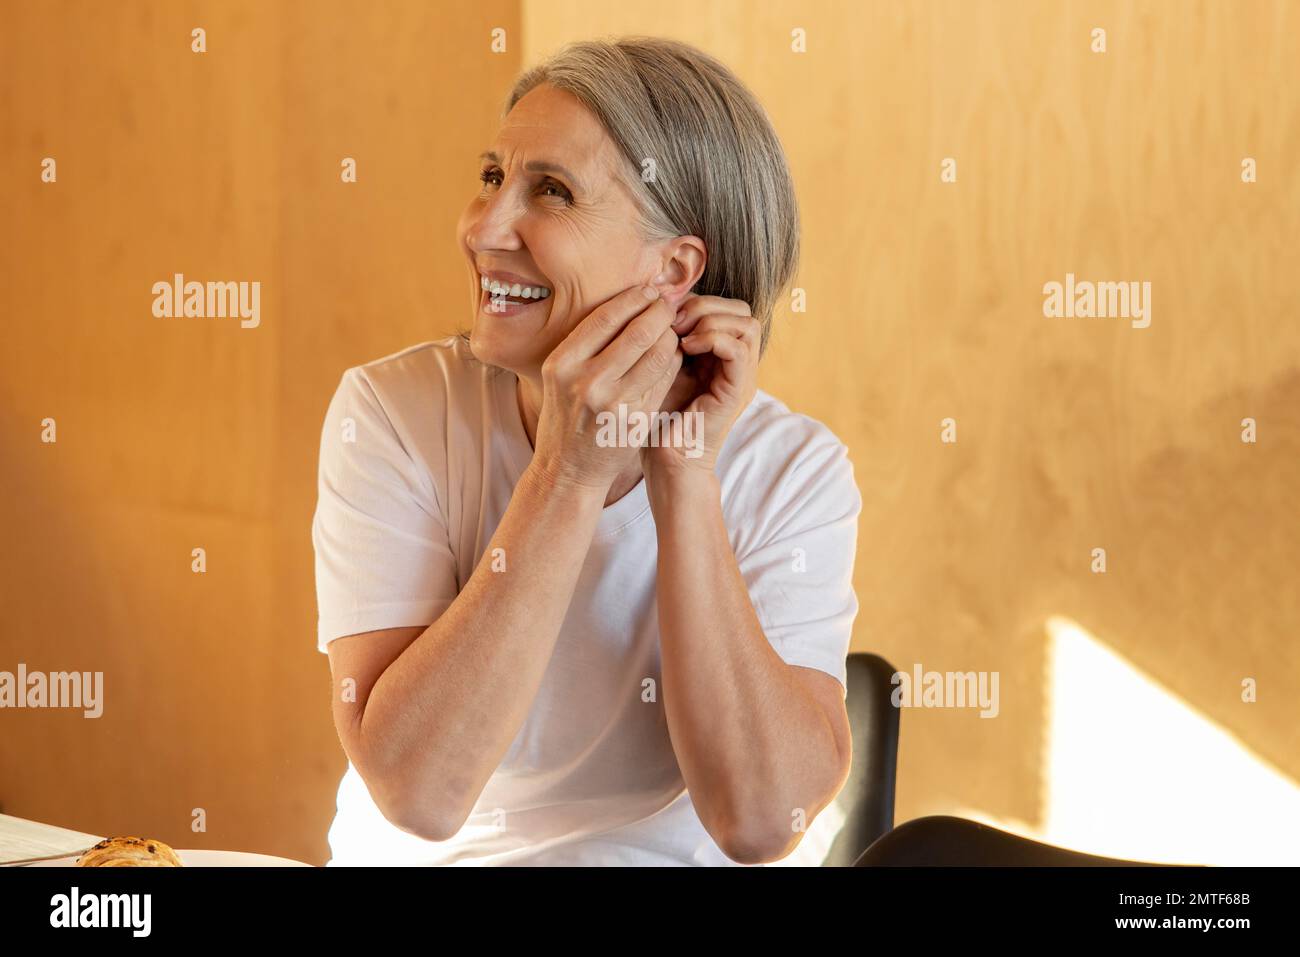 Smiling mid aged woman wearing her earrings Stock Photo